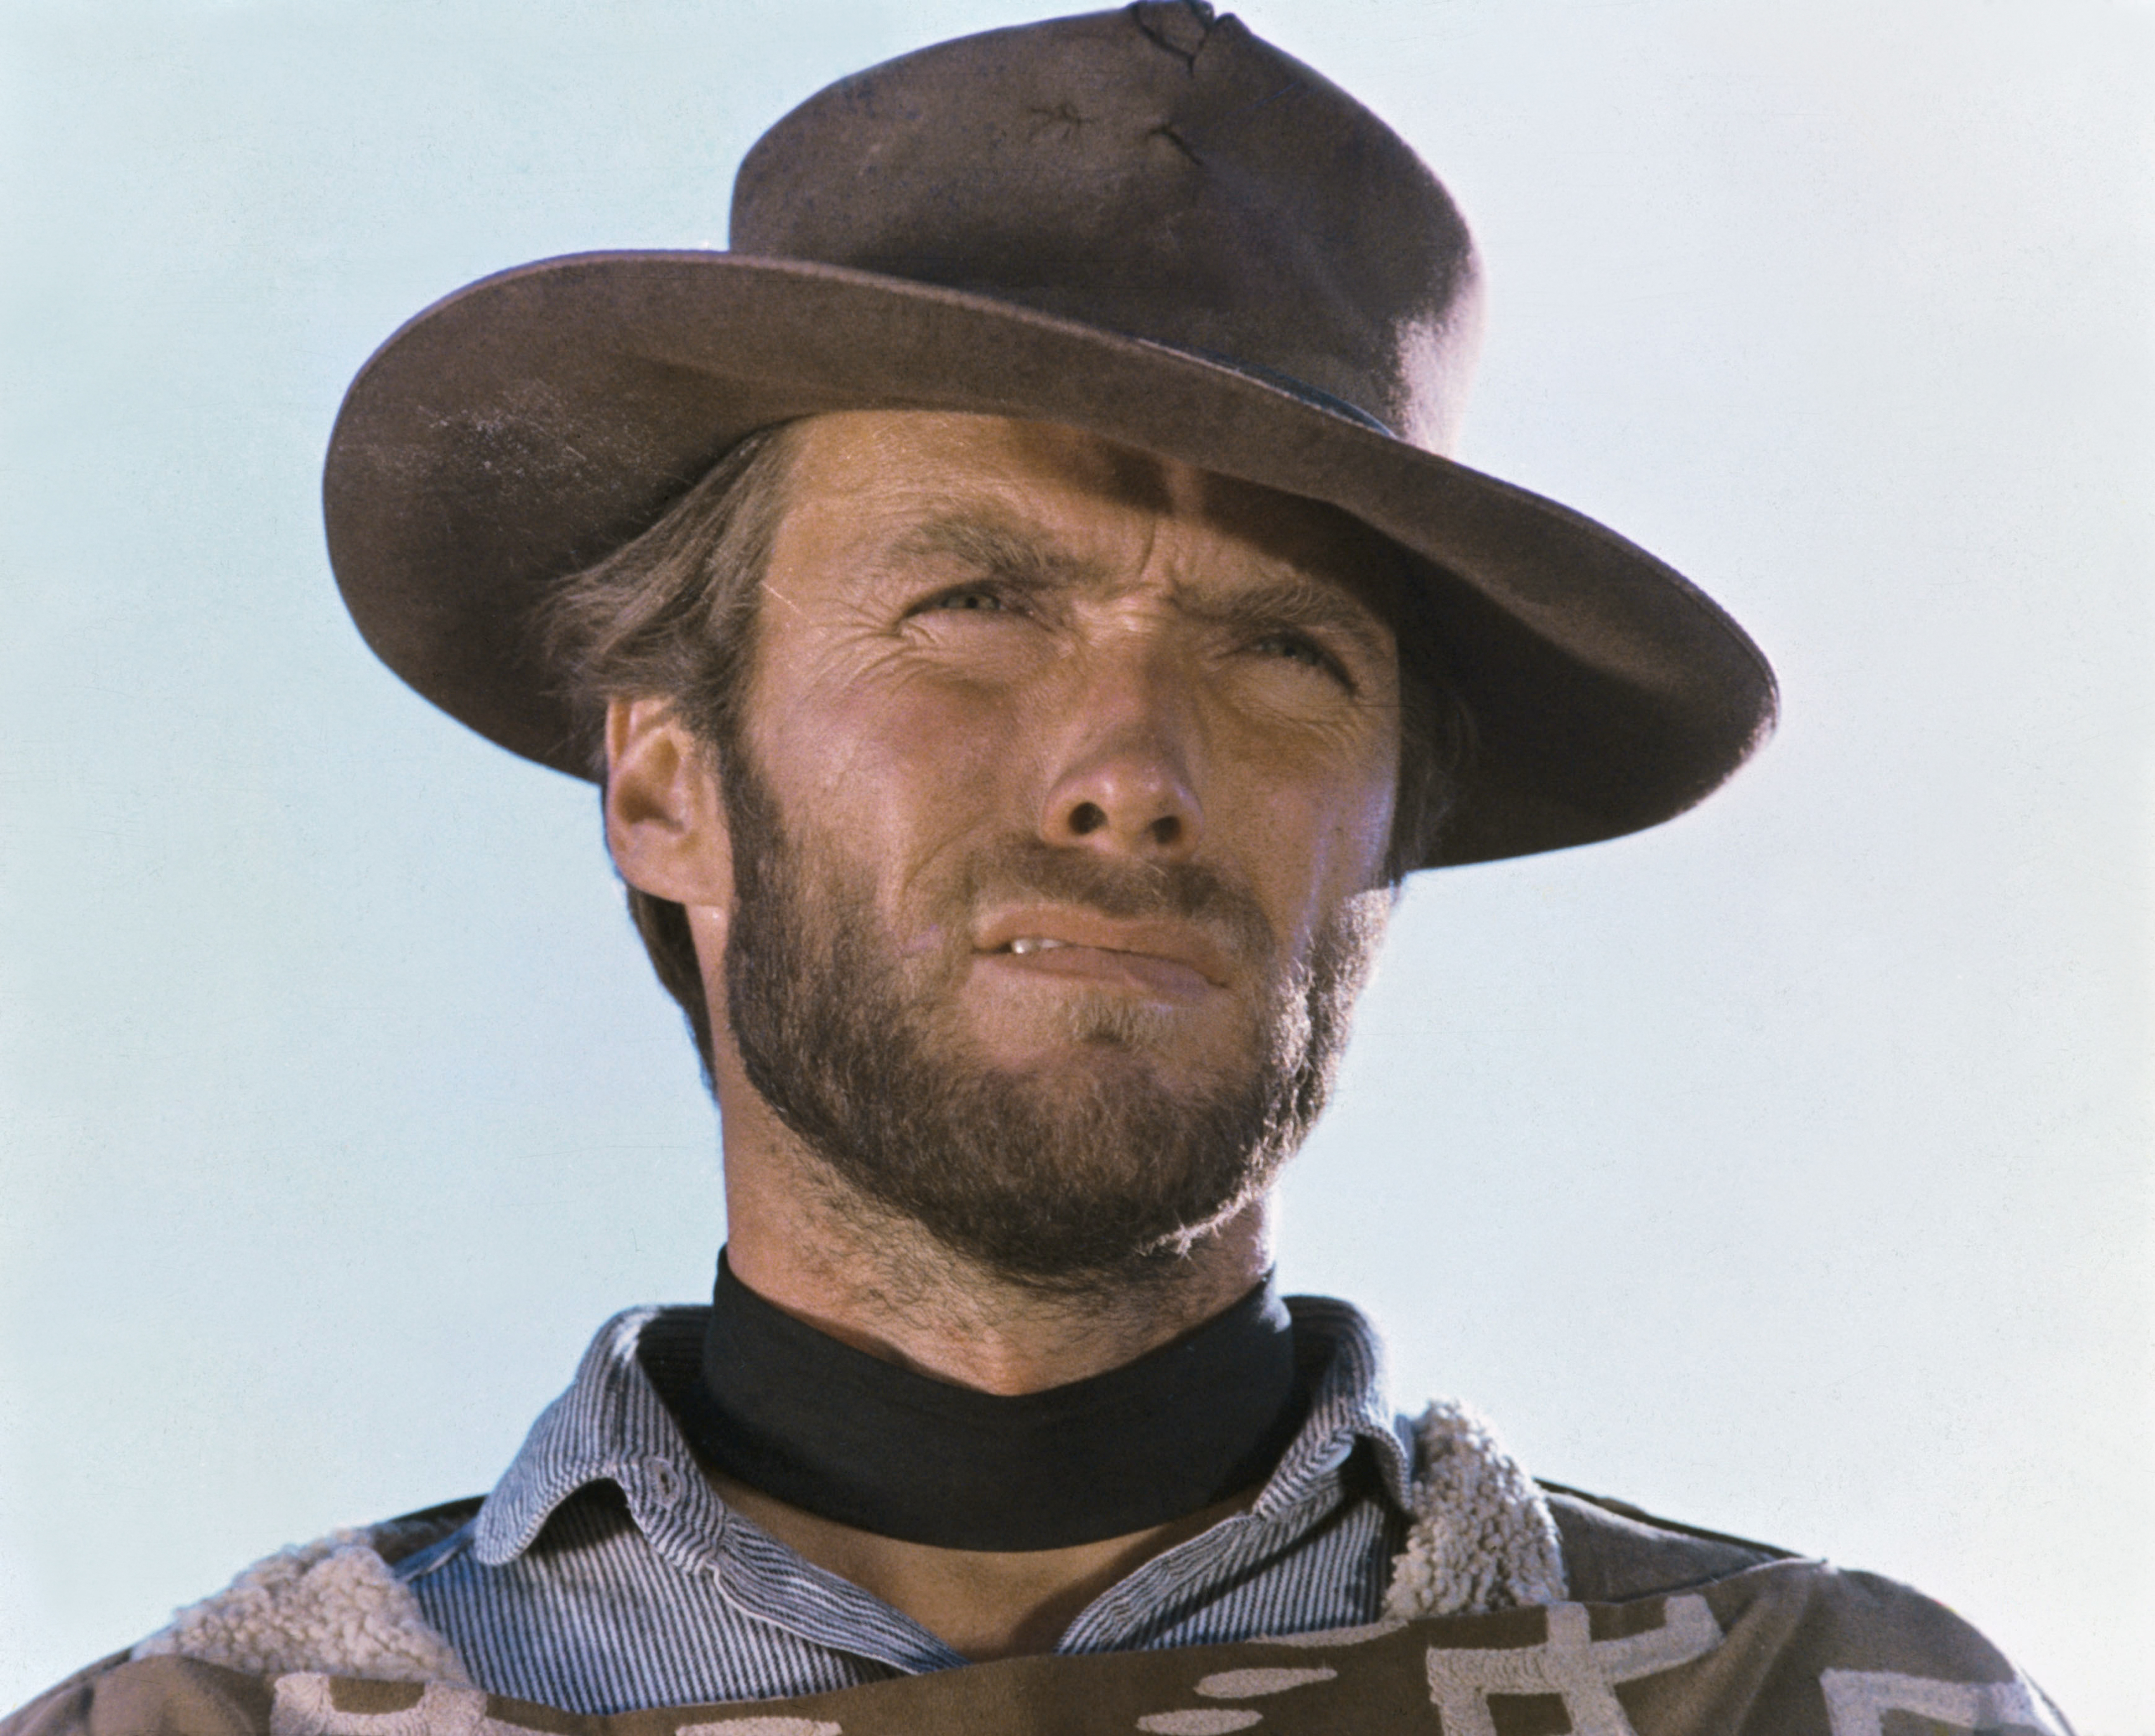 Clint Eastwood on the set of 'The Good, The Bad and The Ugly' in 1966. | Source: Getty Images